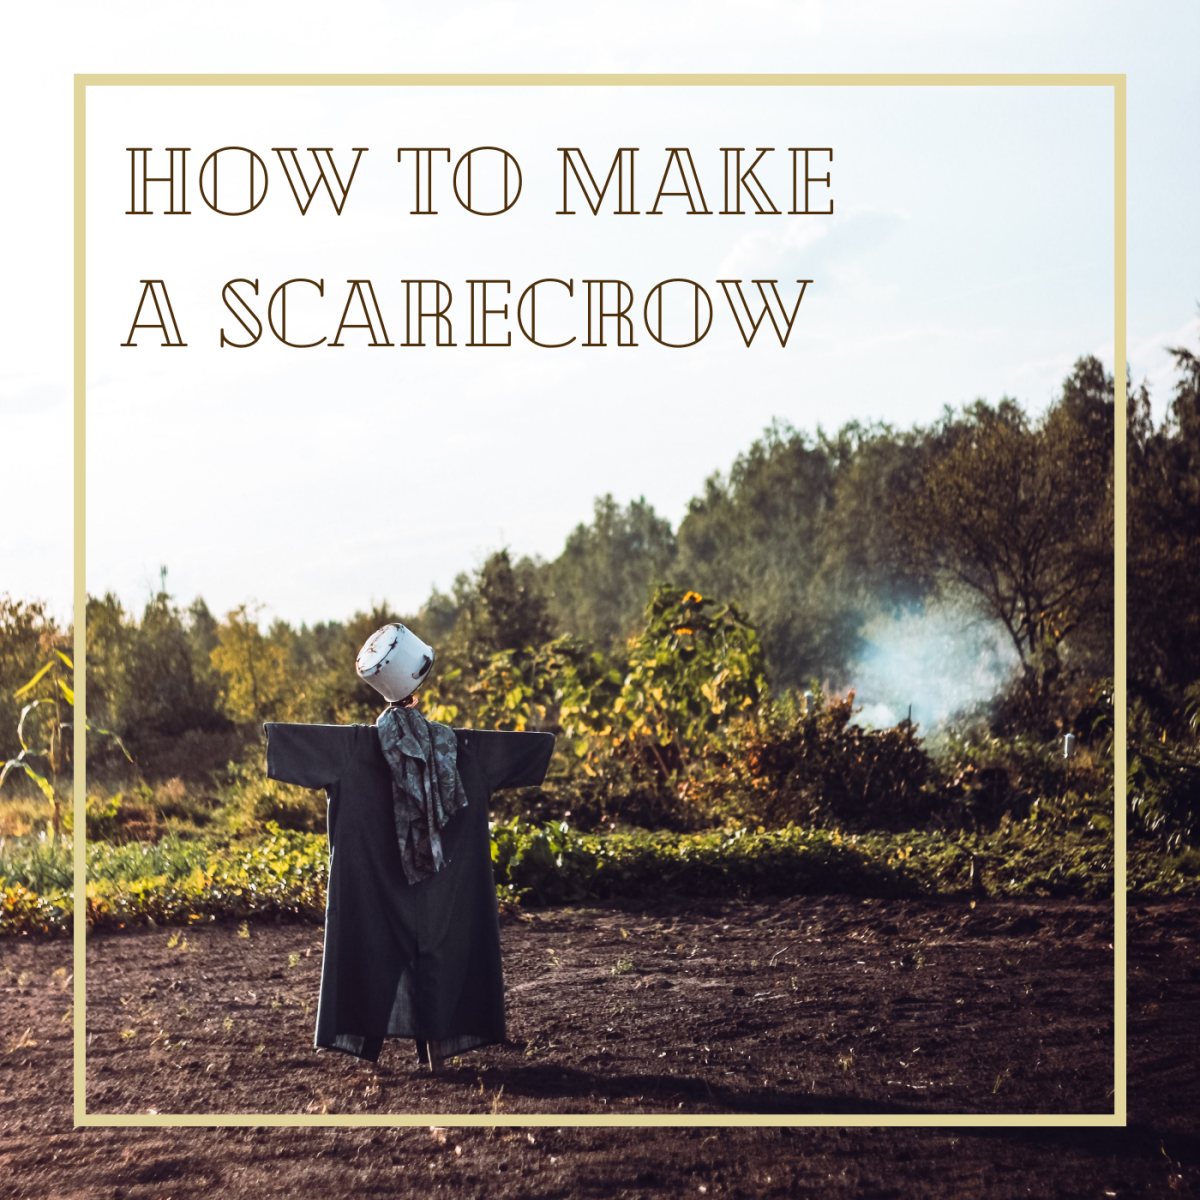 Instructions for Making a Scarecrow